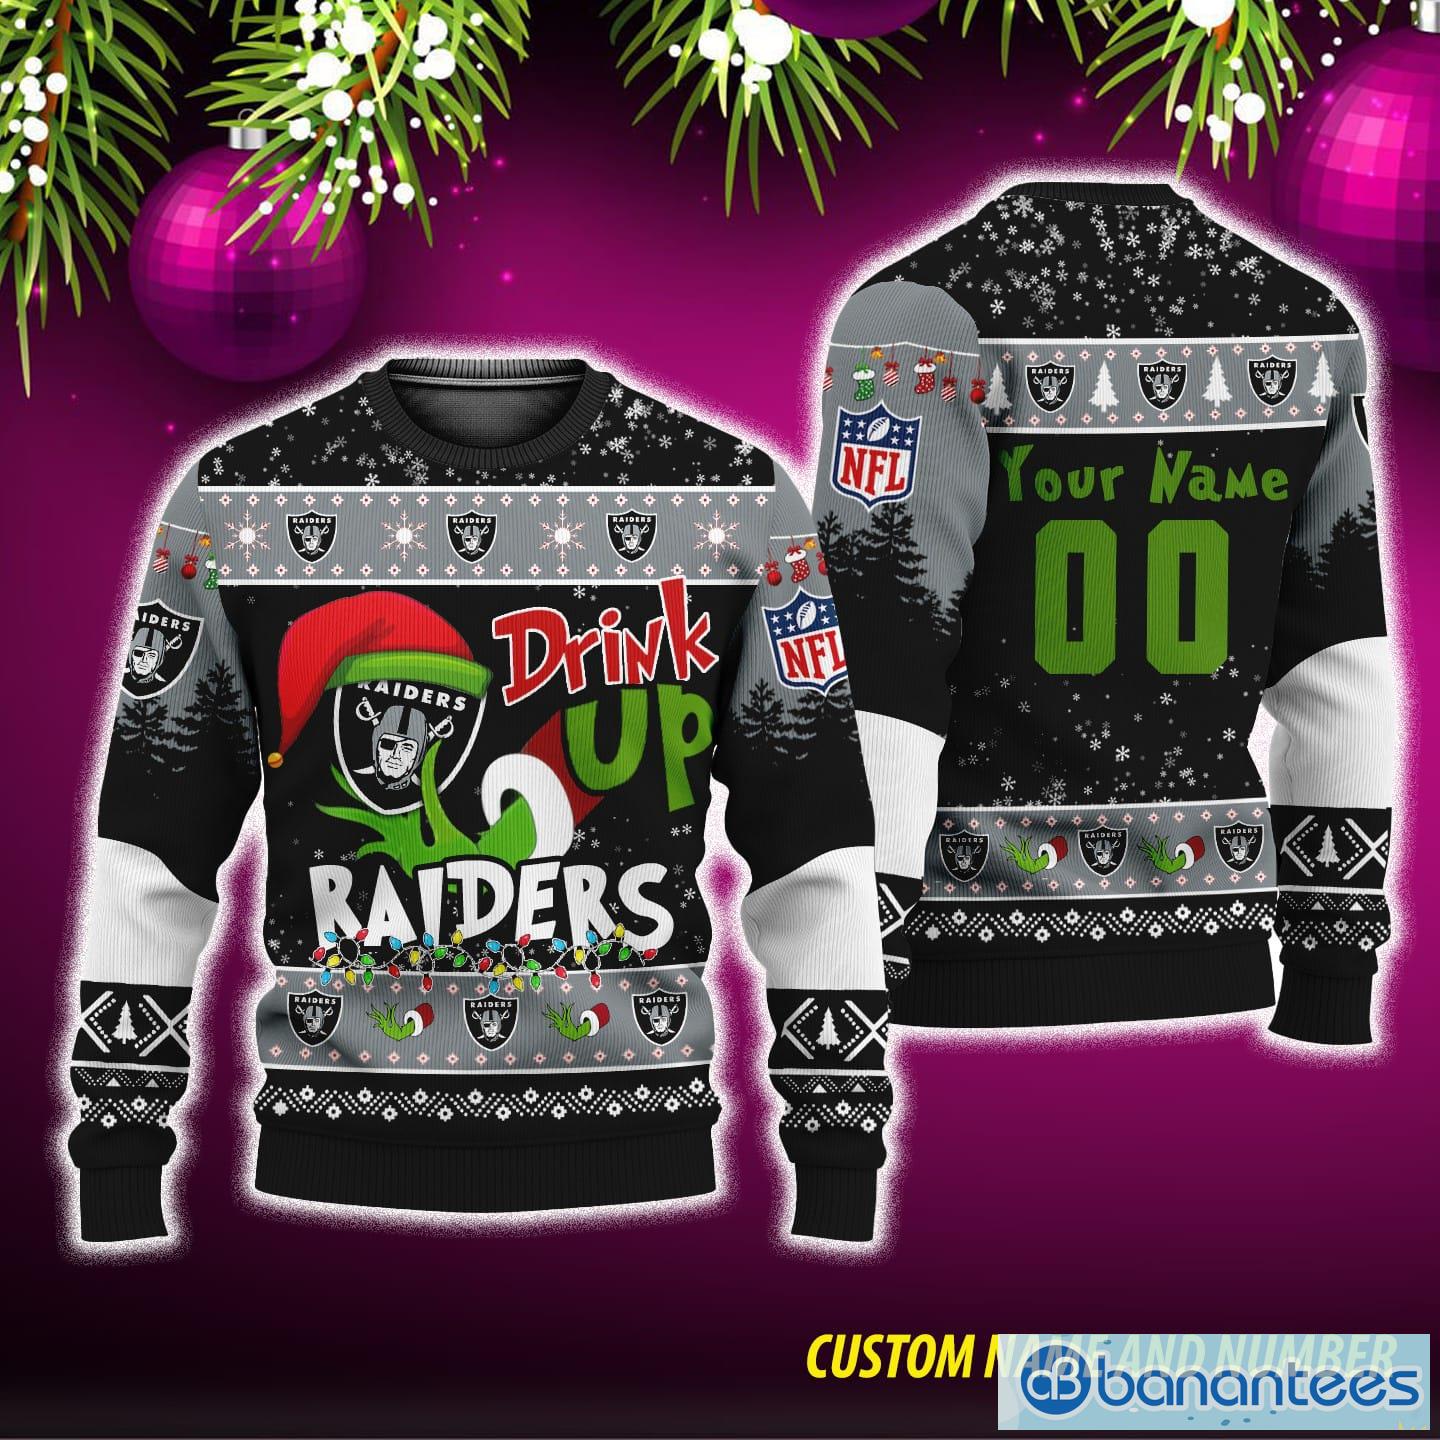 NFL Grinch Drink Up Las Vegas Raiders Ugly Christmas Sweater Custom Number And Name - NFL Grinch Drink Up Las Vegas Raiders Ugly Christmas Sweater Custom Number And Name